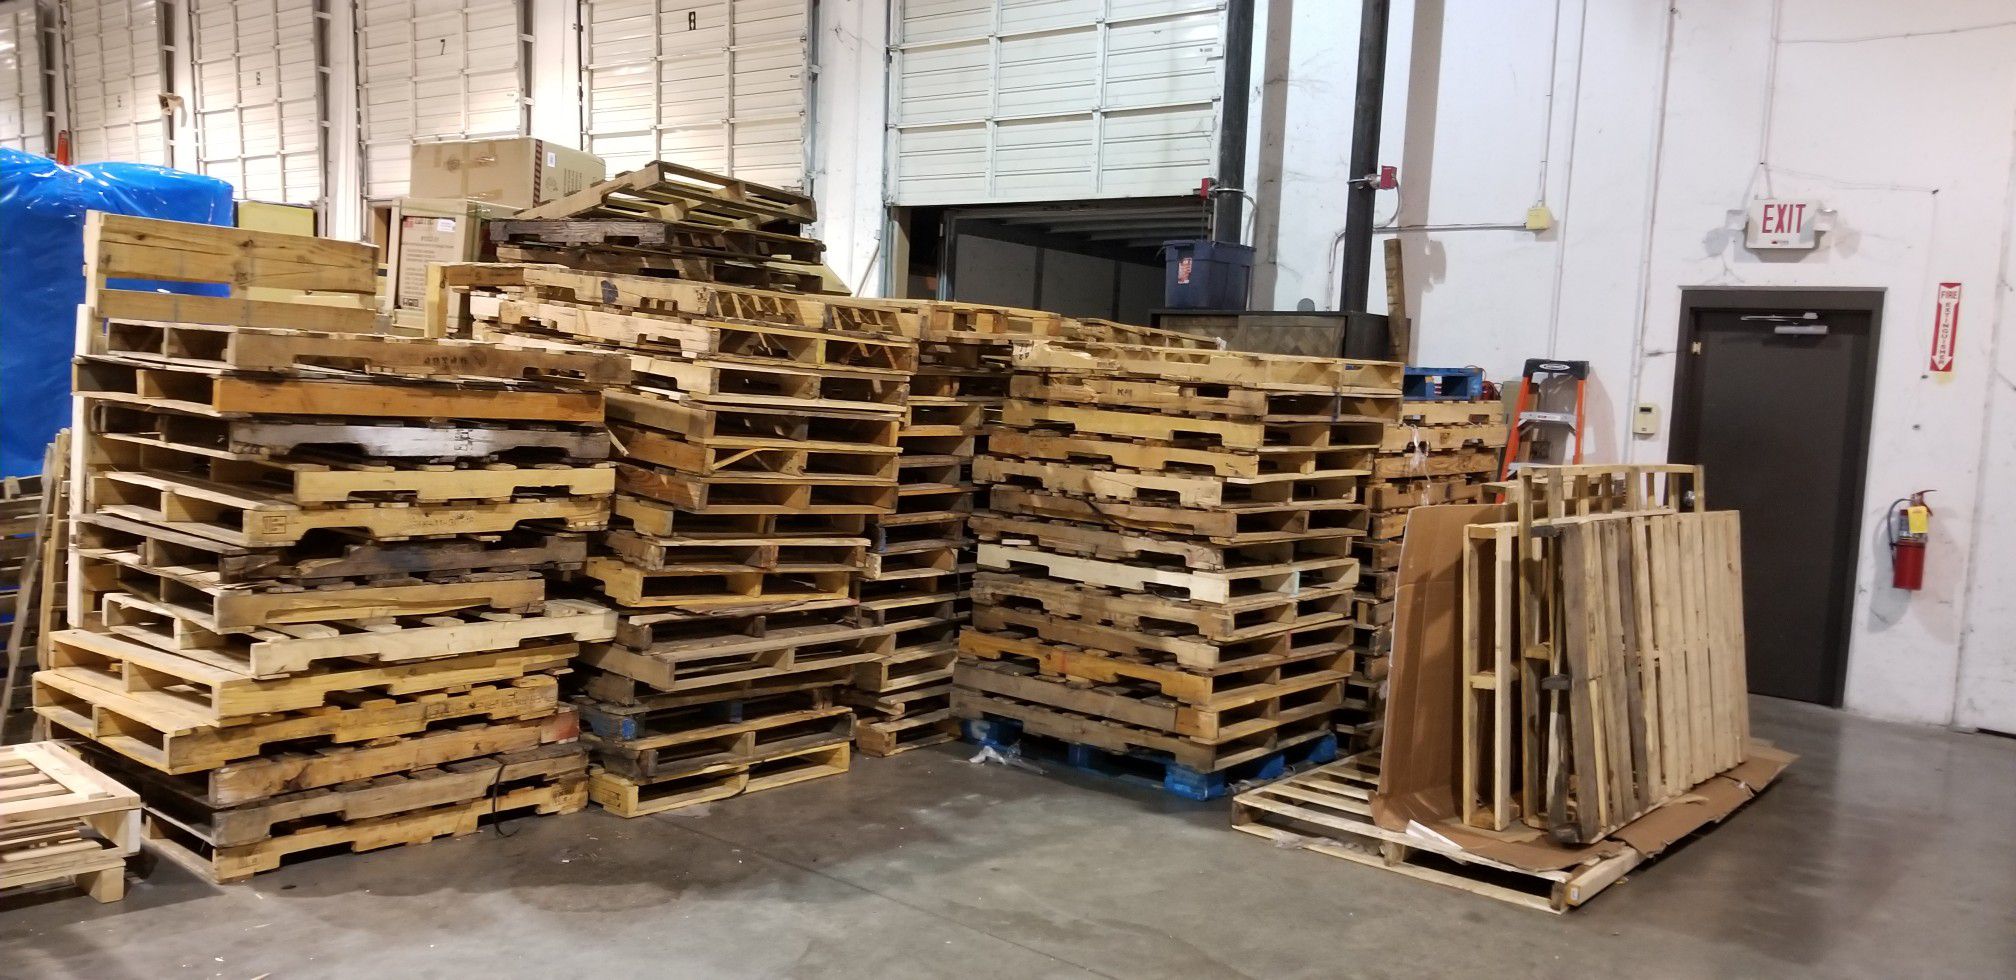 Free pallets must take all